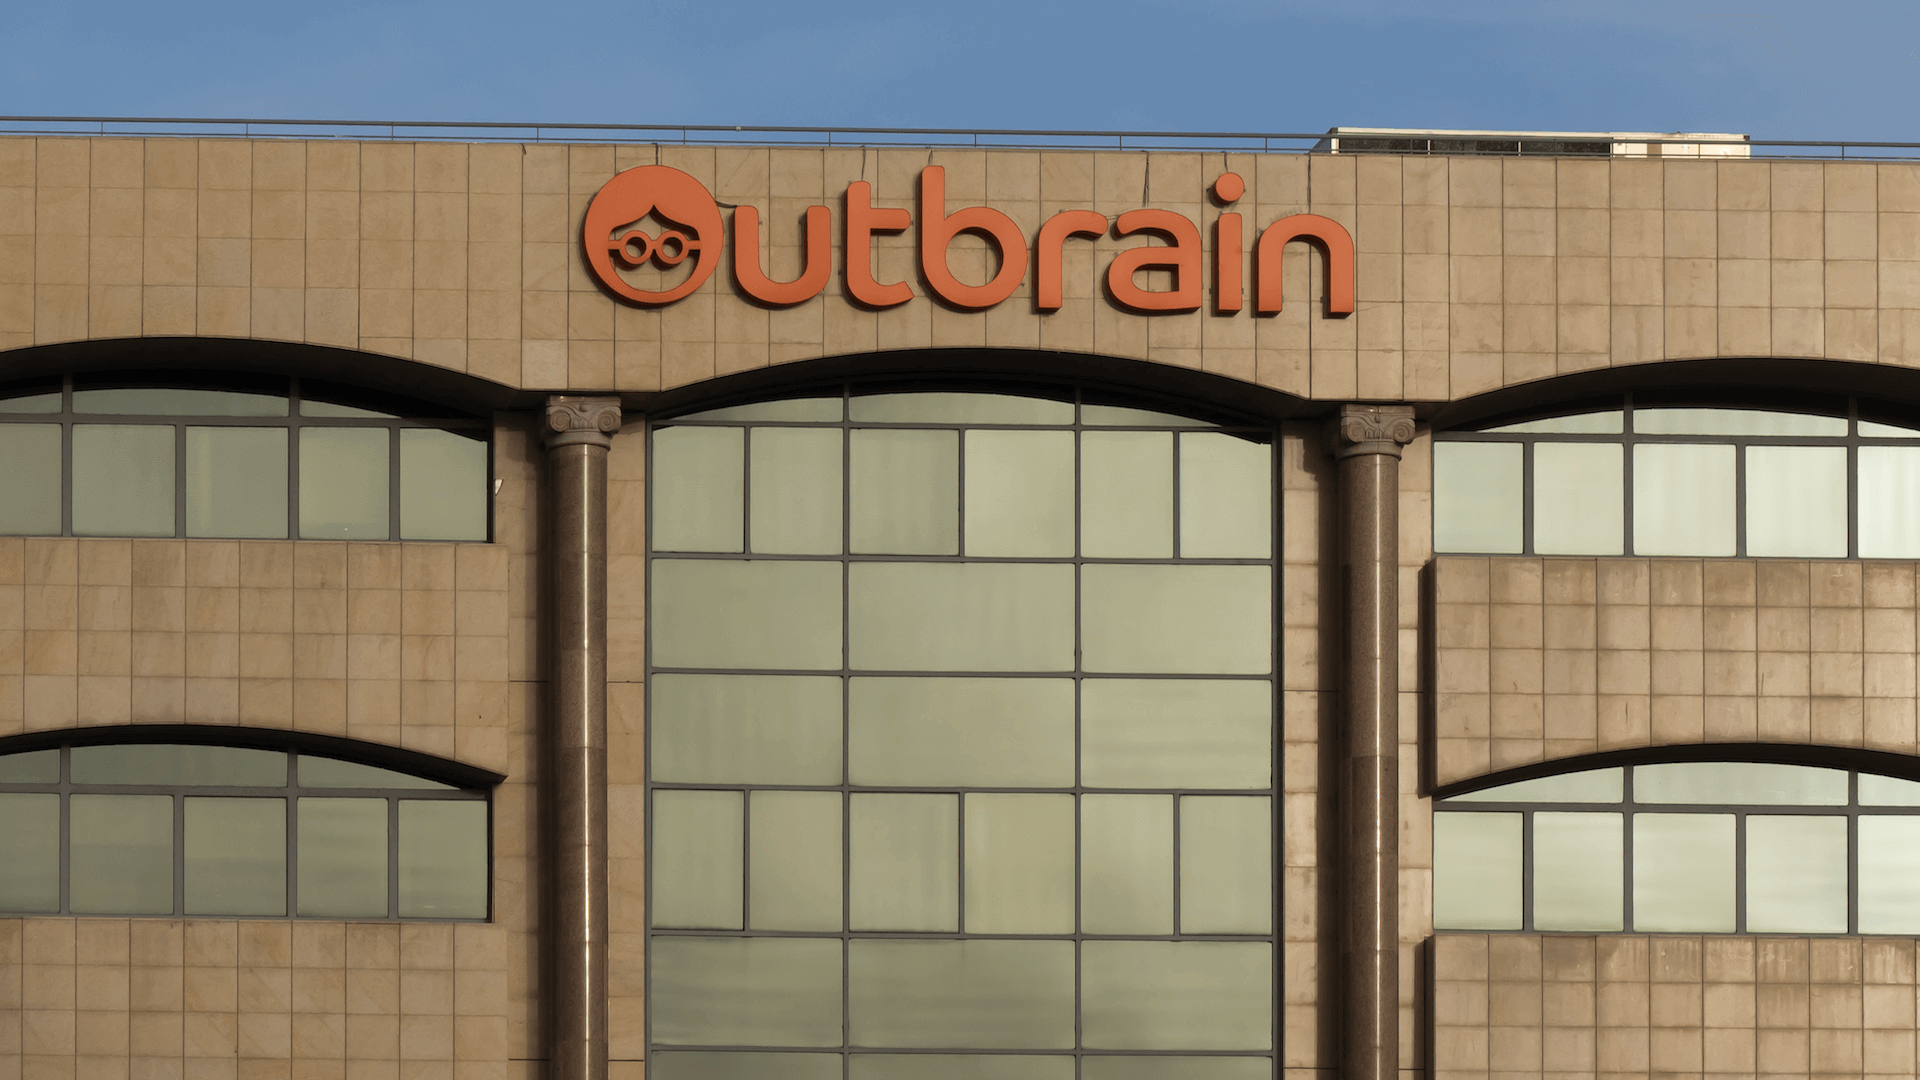 Outbrain Building 1